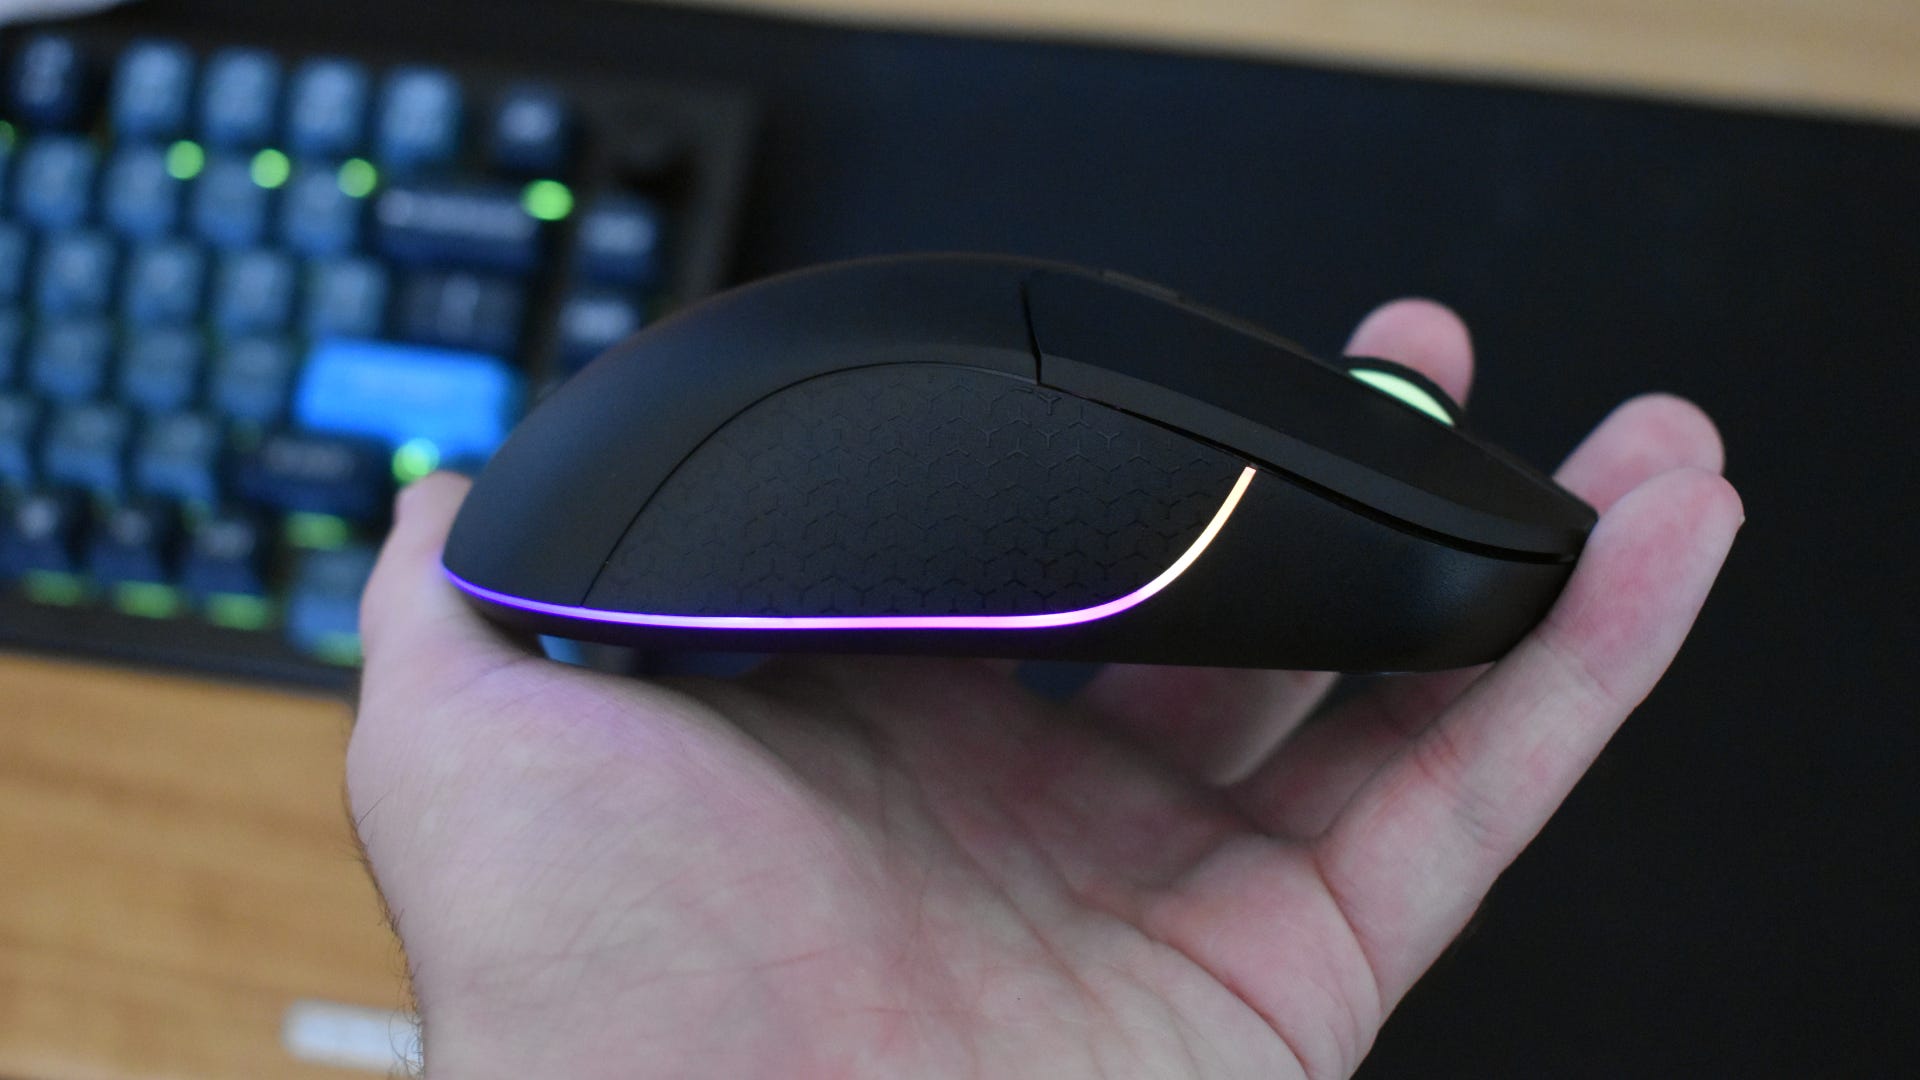 Right side of Keychron M3 Wireless Mouse